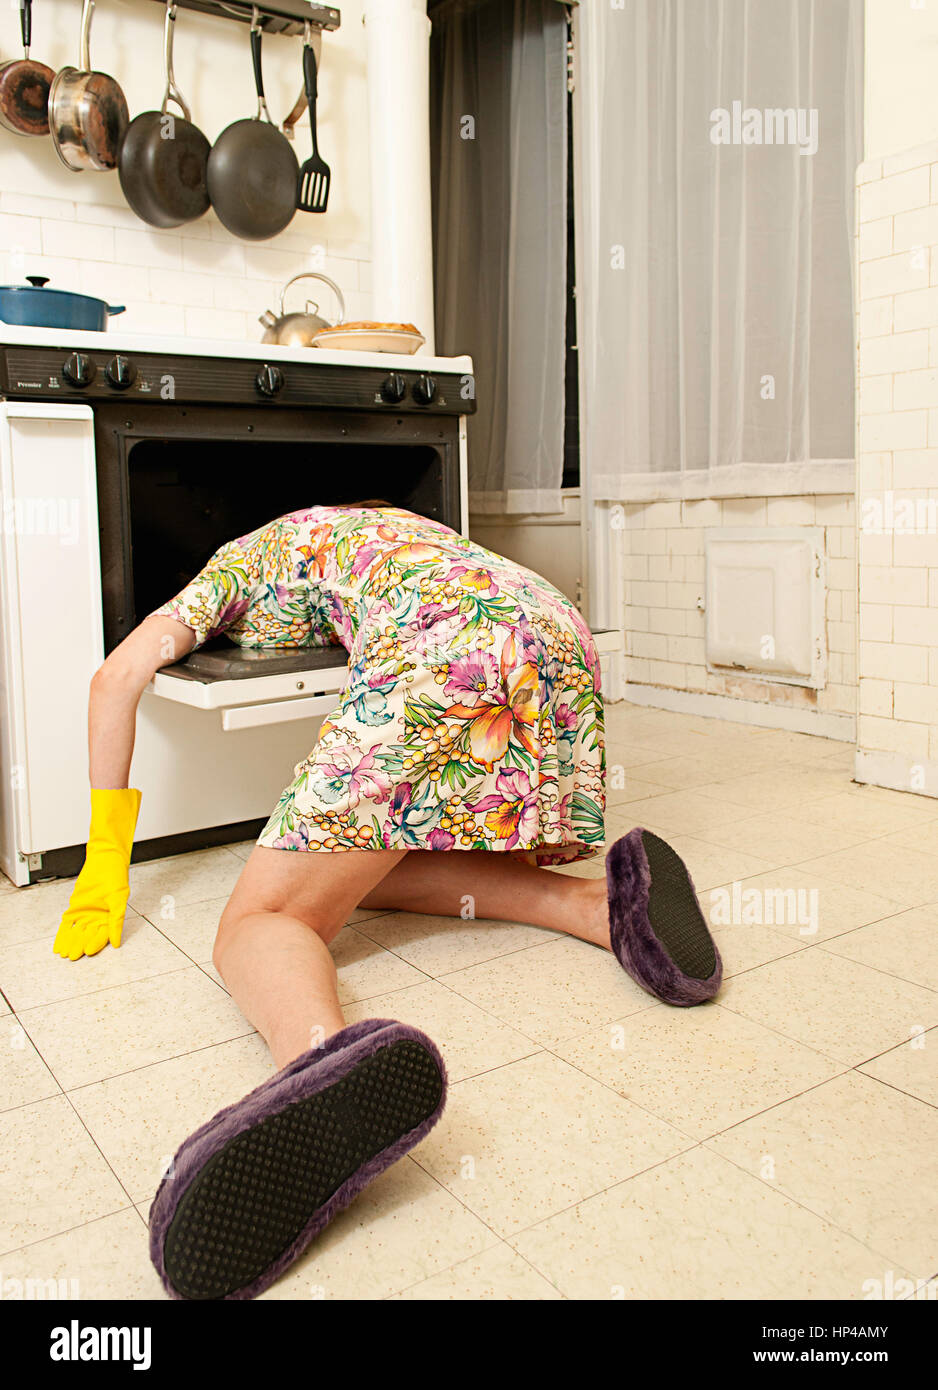 A woman laying on a kitchen floor with her head in an oven. Stock Photo